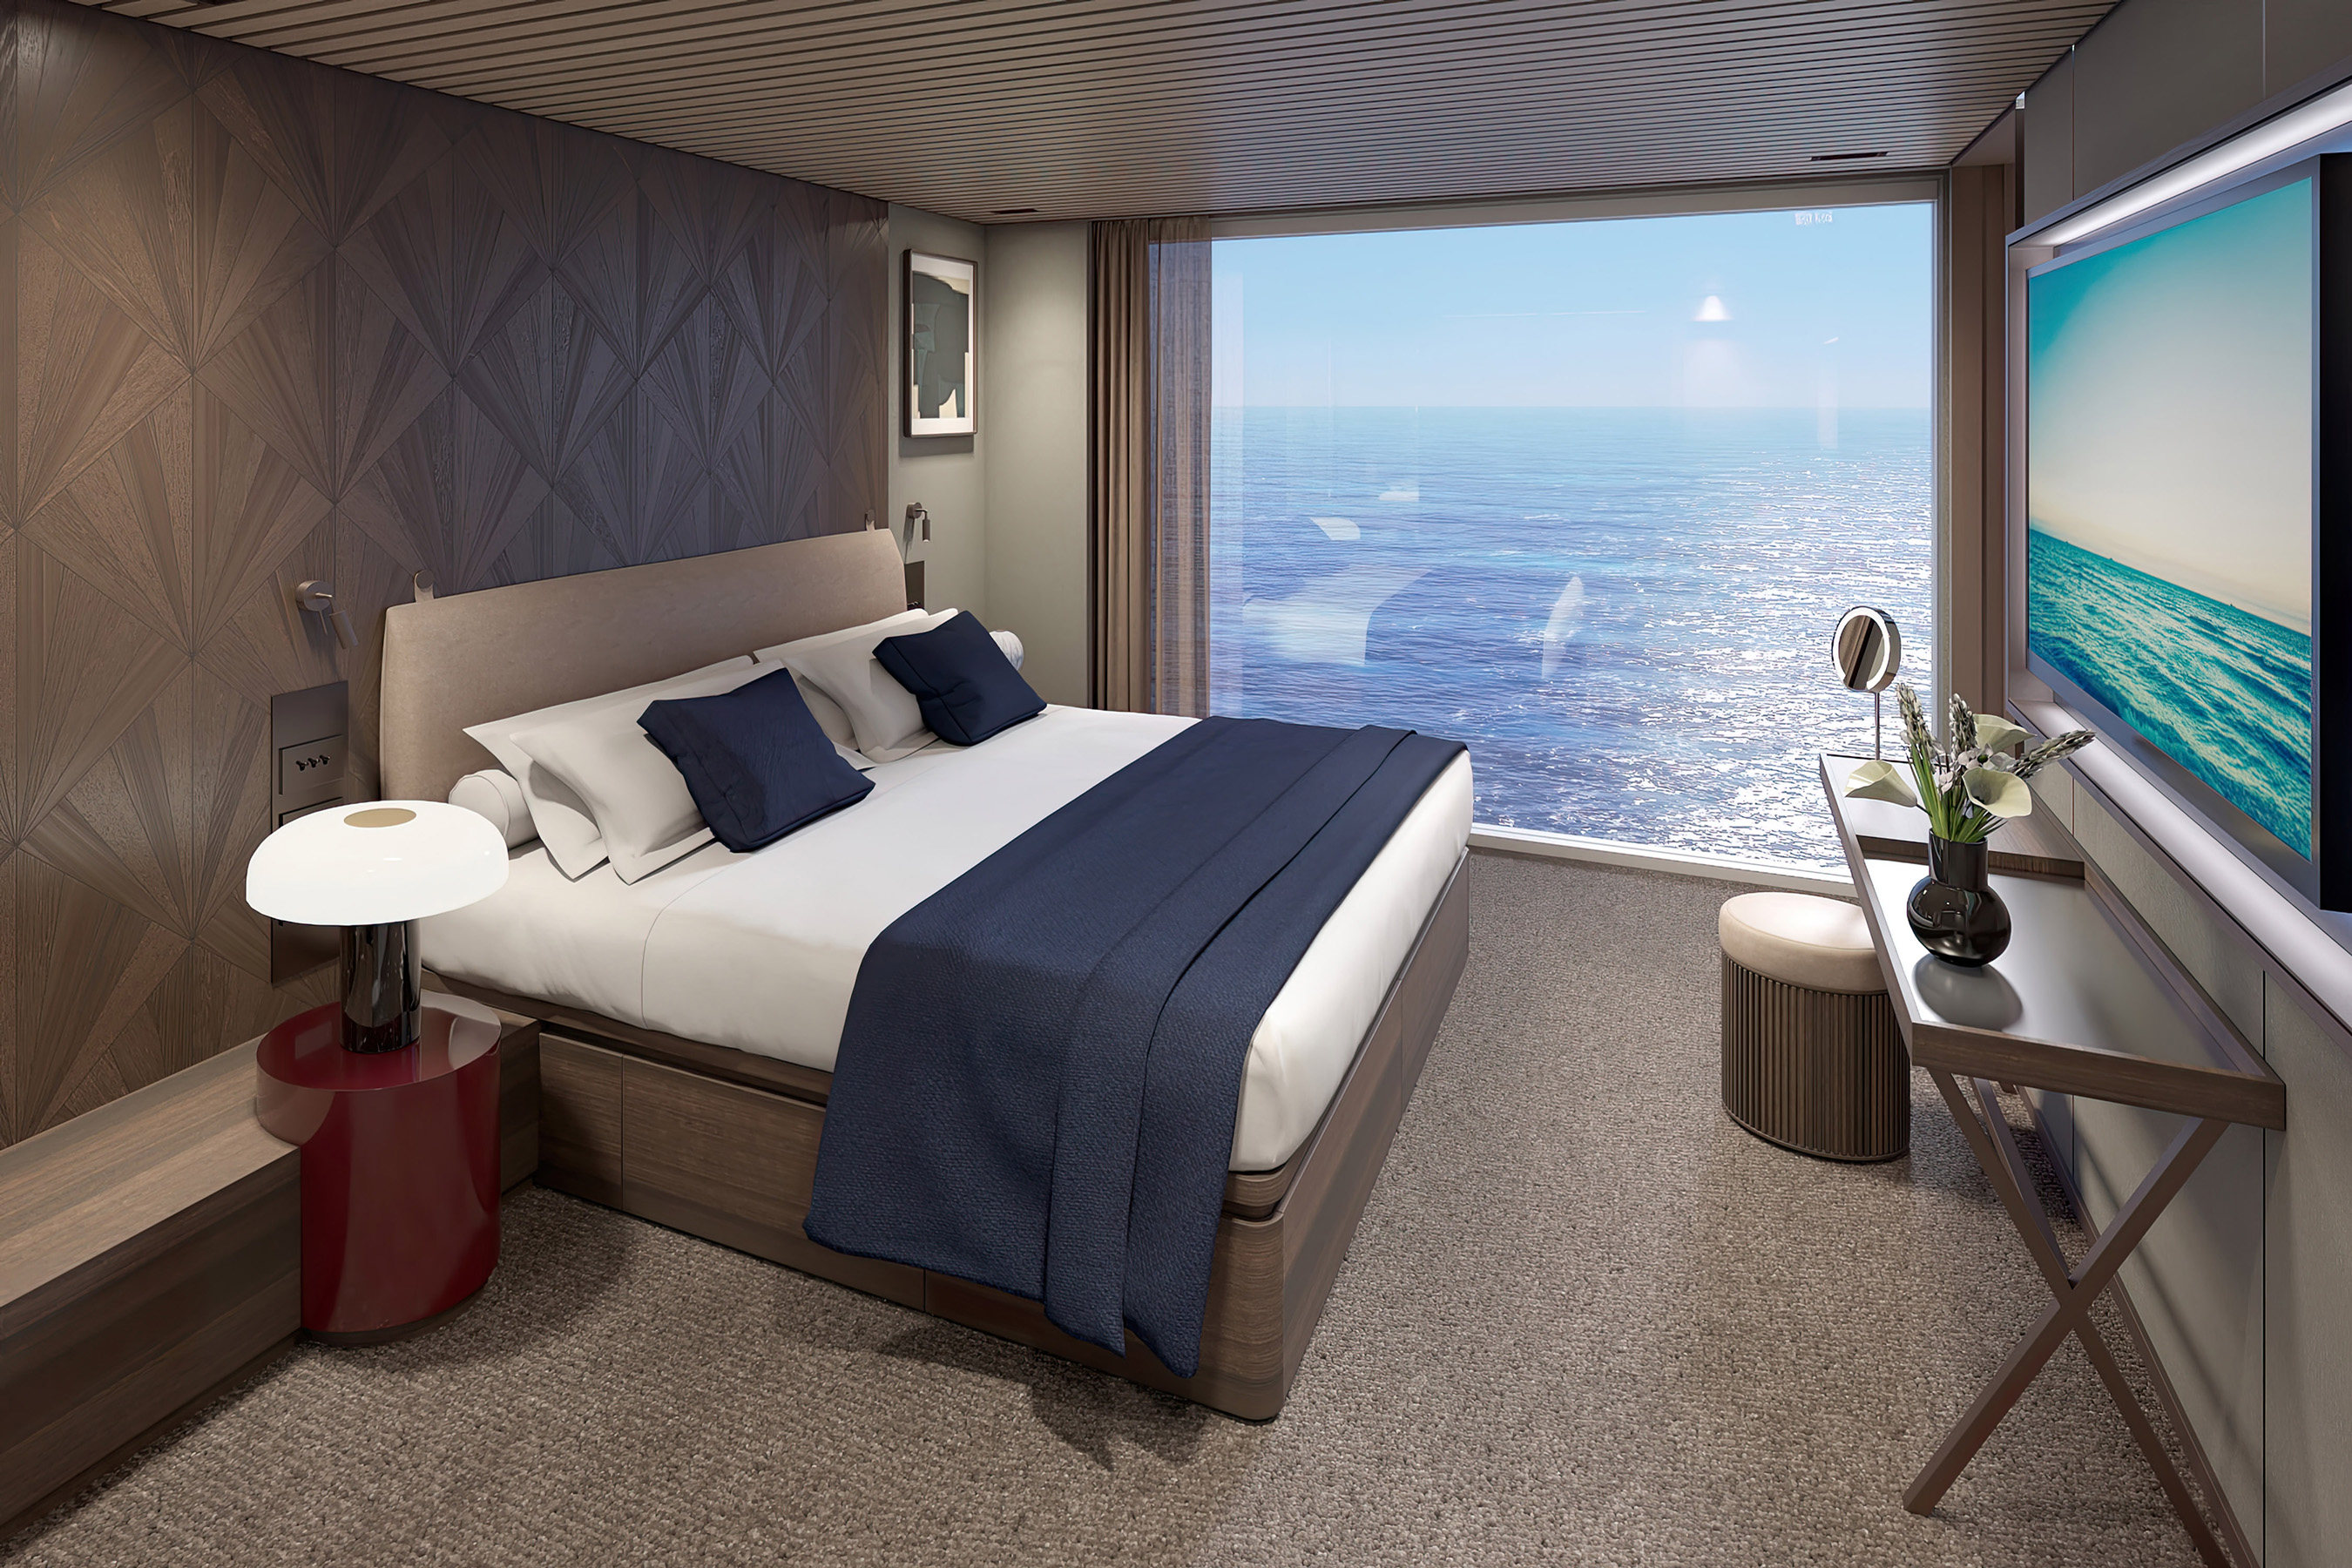 The master bedroom on board Norwegian Aqua’s three-bedroom Duplex Haven Suite boasts floor-to-ceiling windows, offering unparalleled views from the comfort of this luxury stateroom.